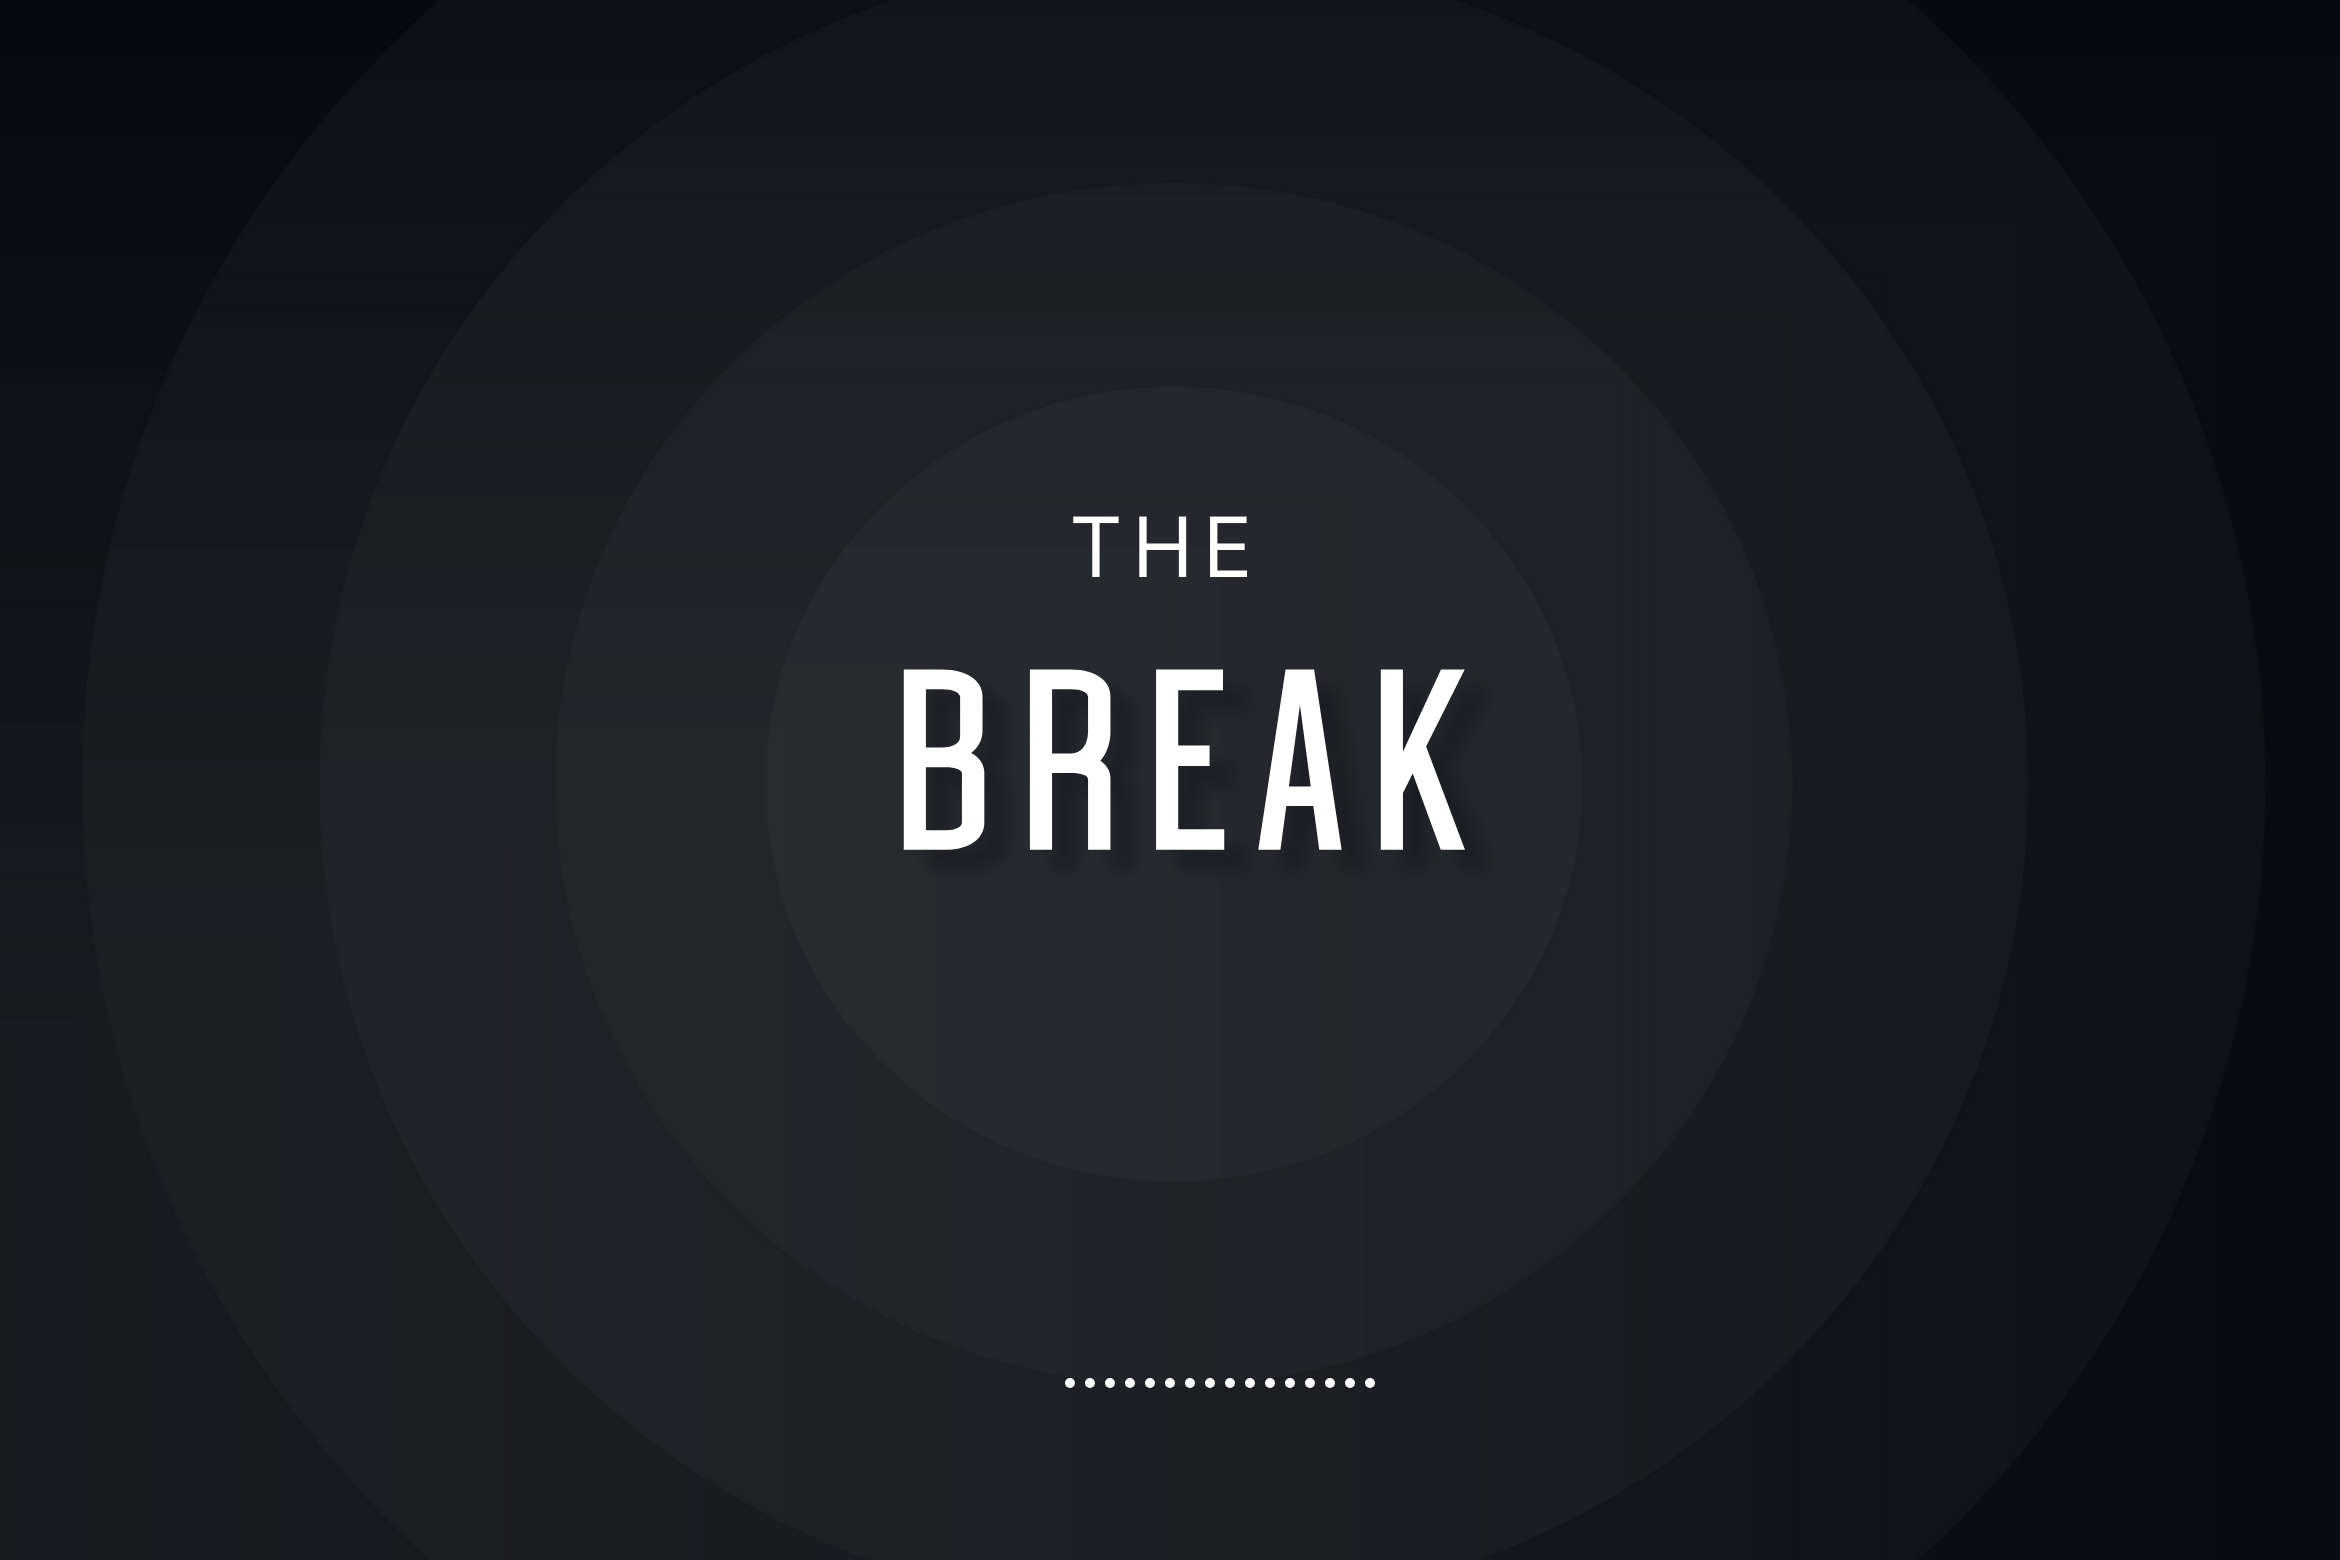 A dark, circular gradient background with the words "THE BREAK" in the center, written using Wellston font for a simple and modern design.